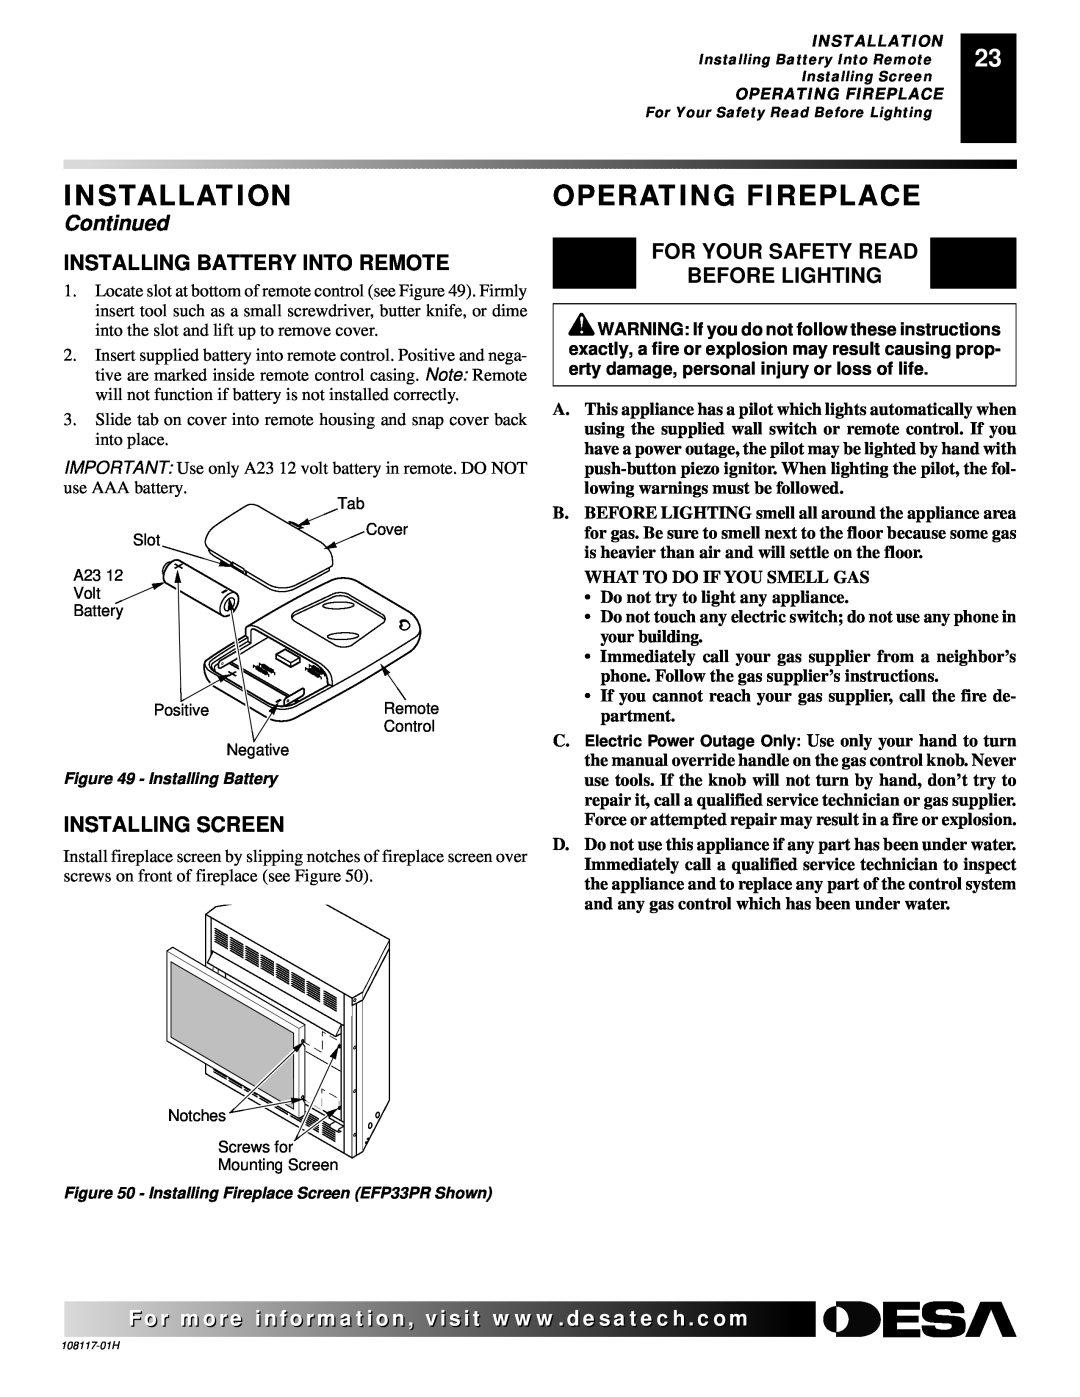 Desa EFP33PR Operating Fireplace, Installing Battery Into Remote, For Your Safety Read Before Lighting, Installing Screen 